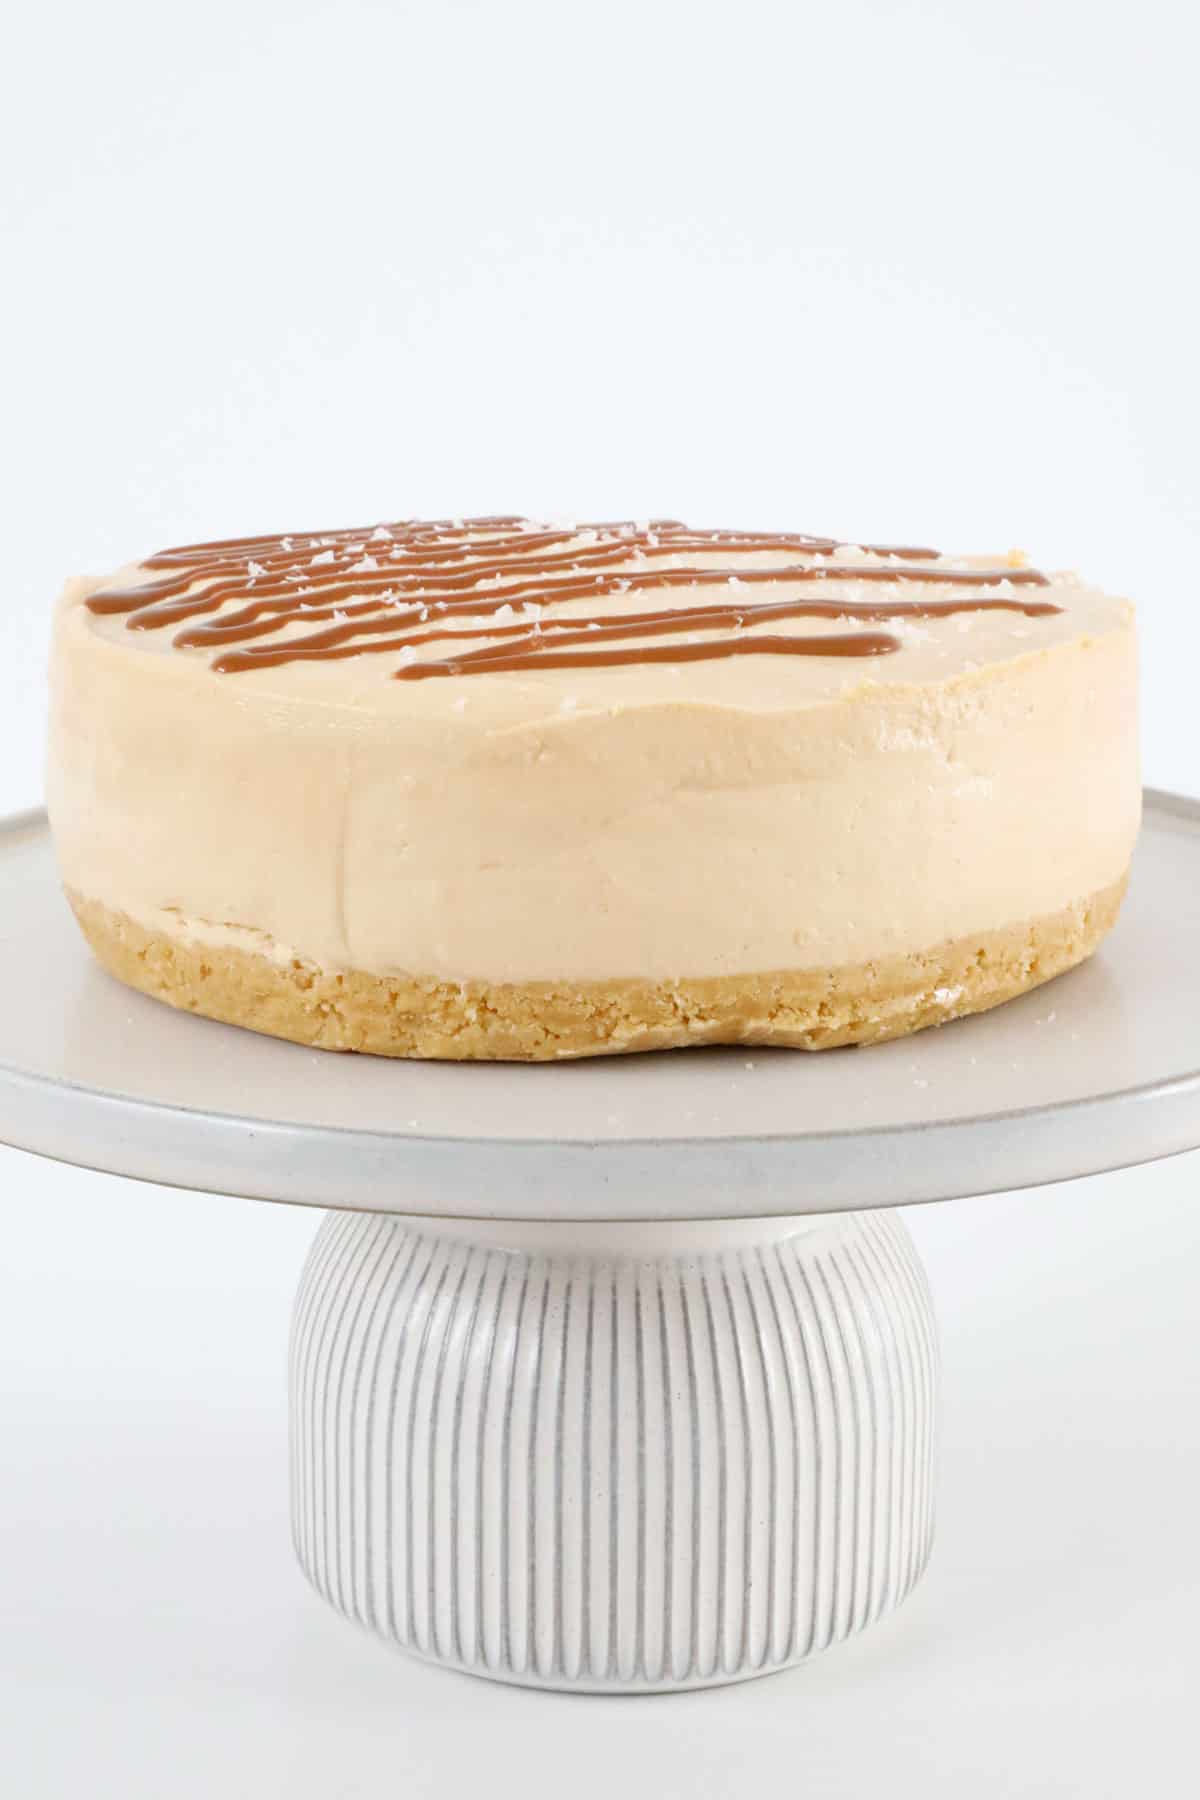 A salted caramel cheesecake, drizzled with caramel sauce, on a cake stand.